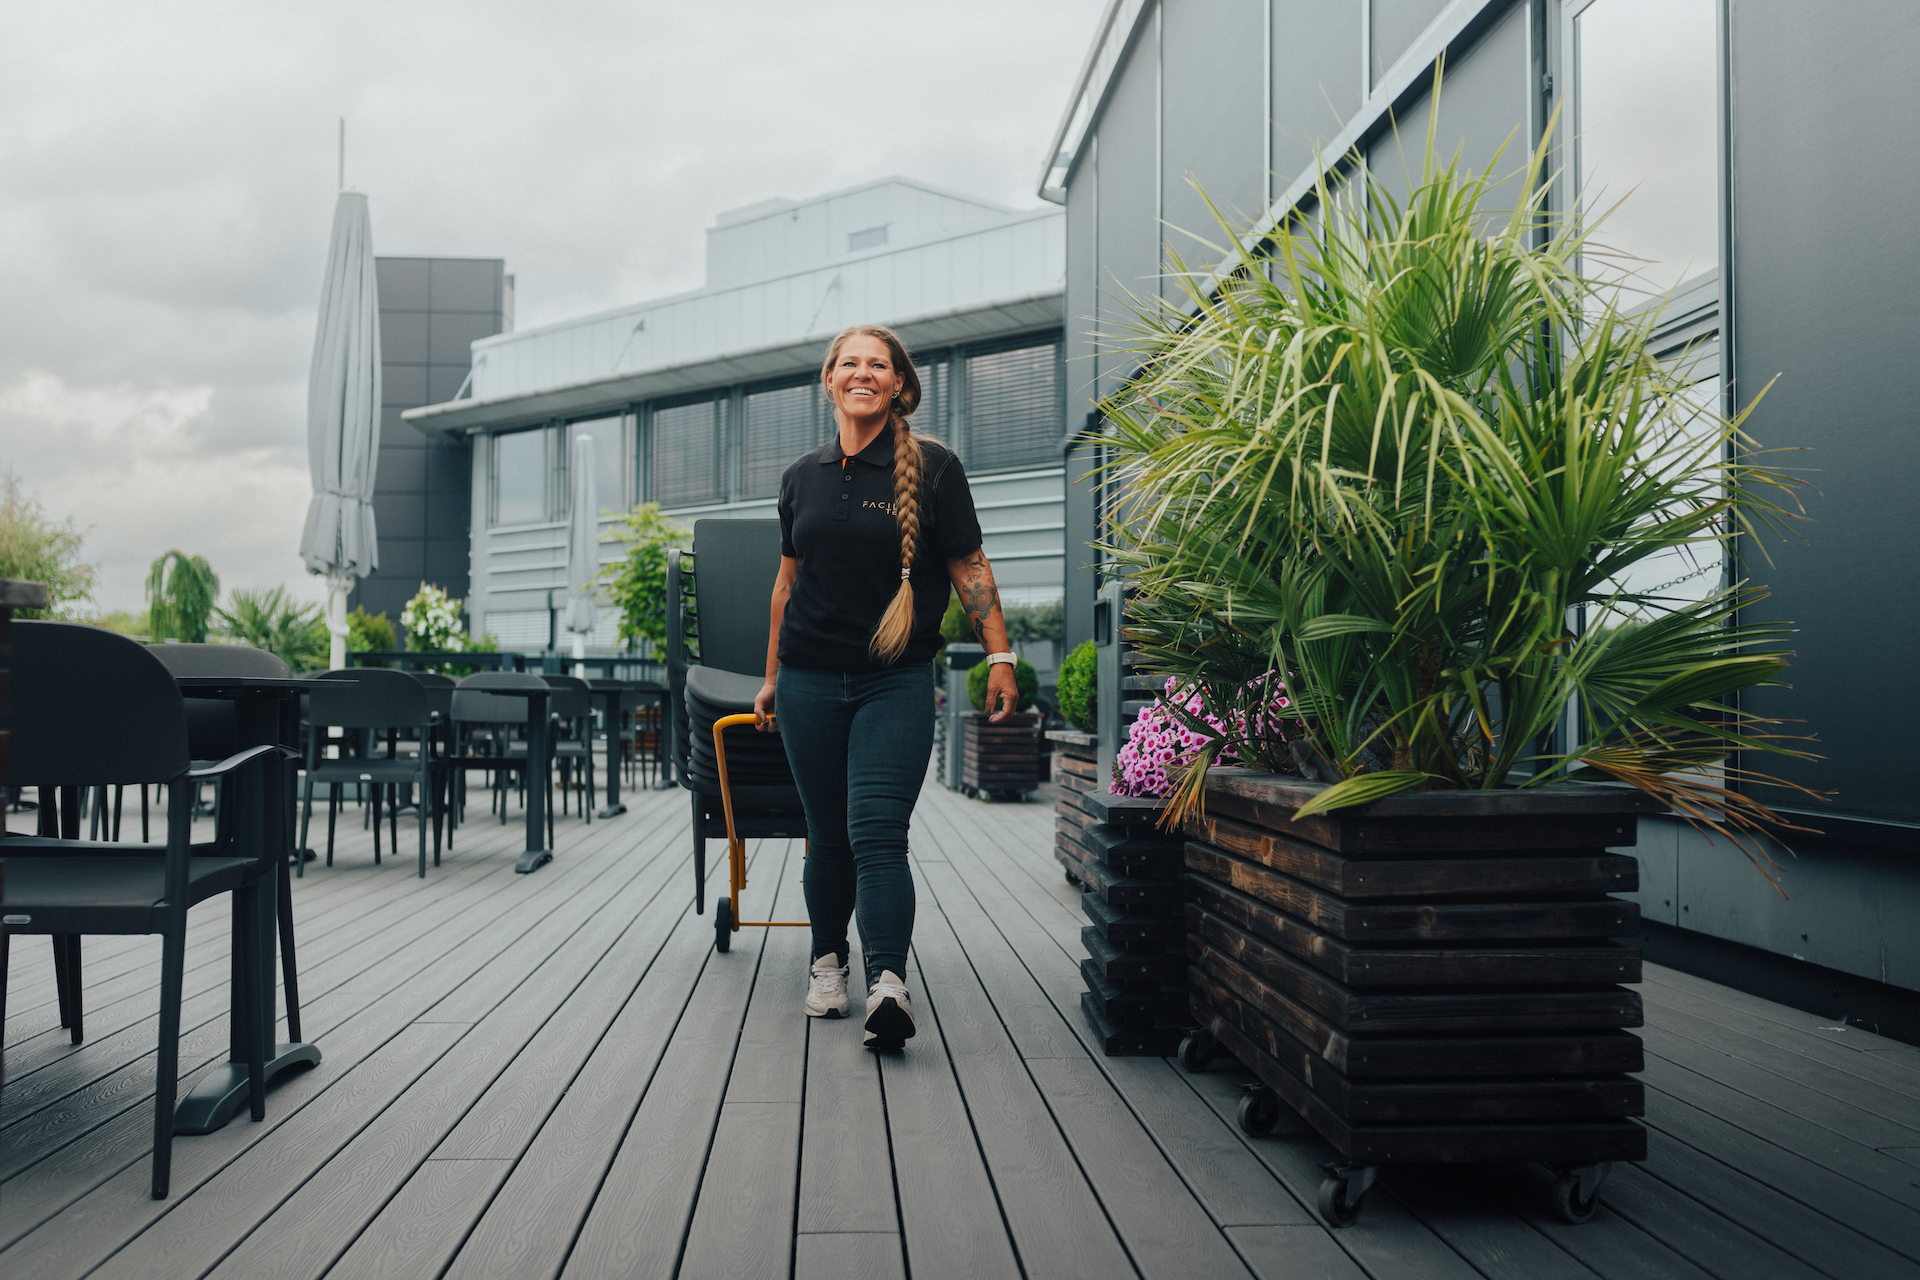 A smiling lady on a rooftop terrace is pulling a load of chairs. Photo.